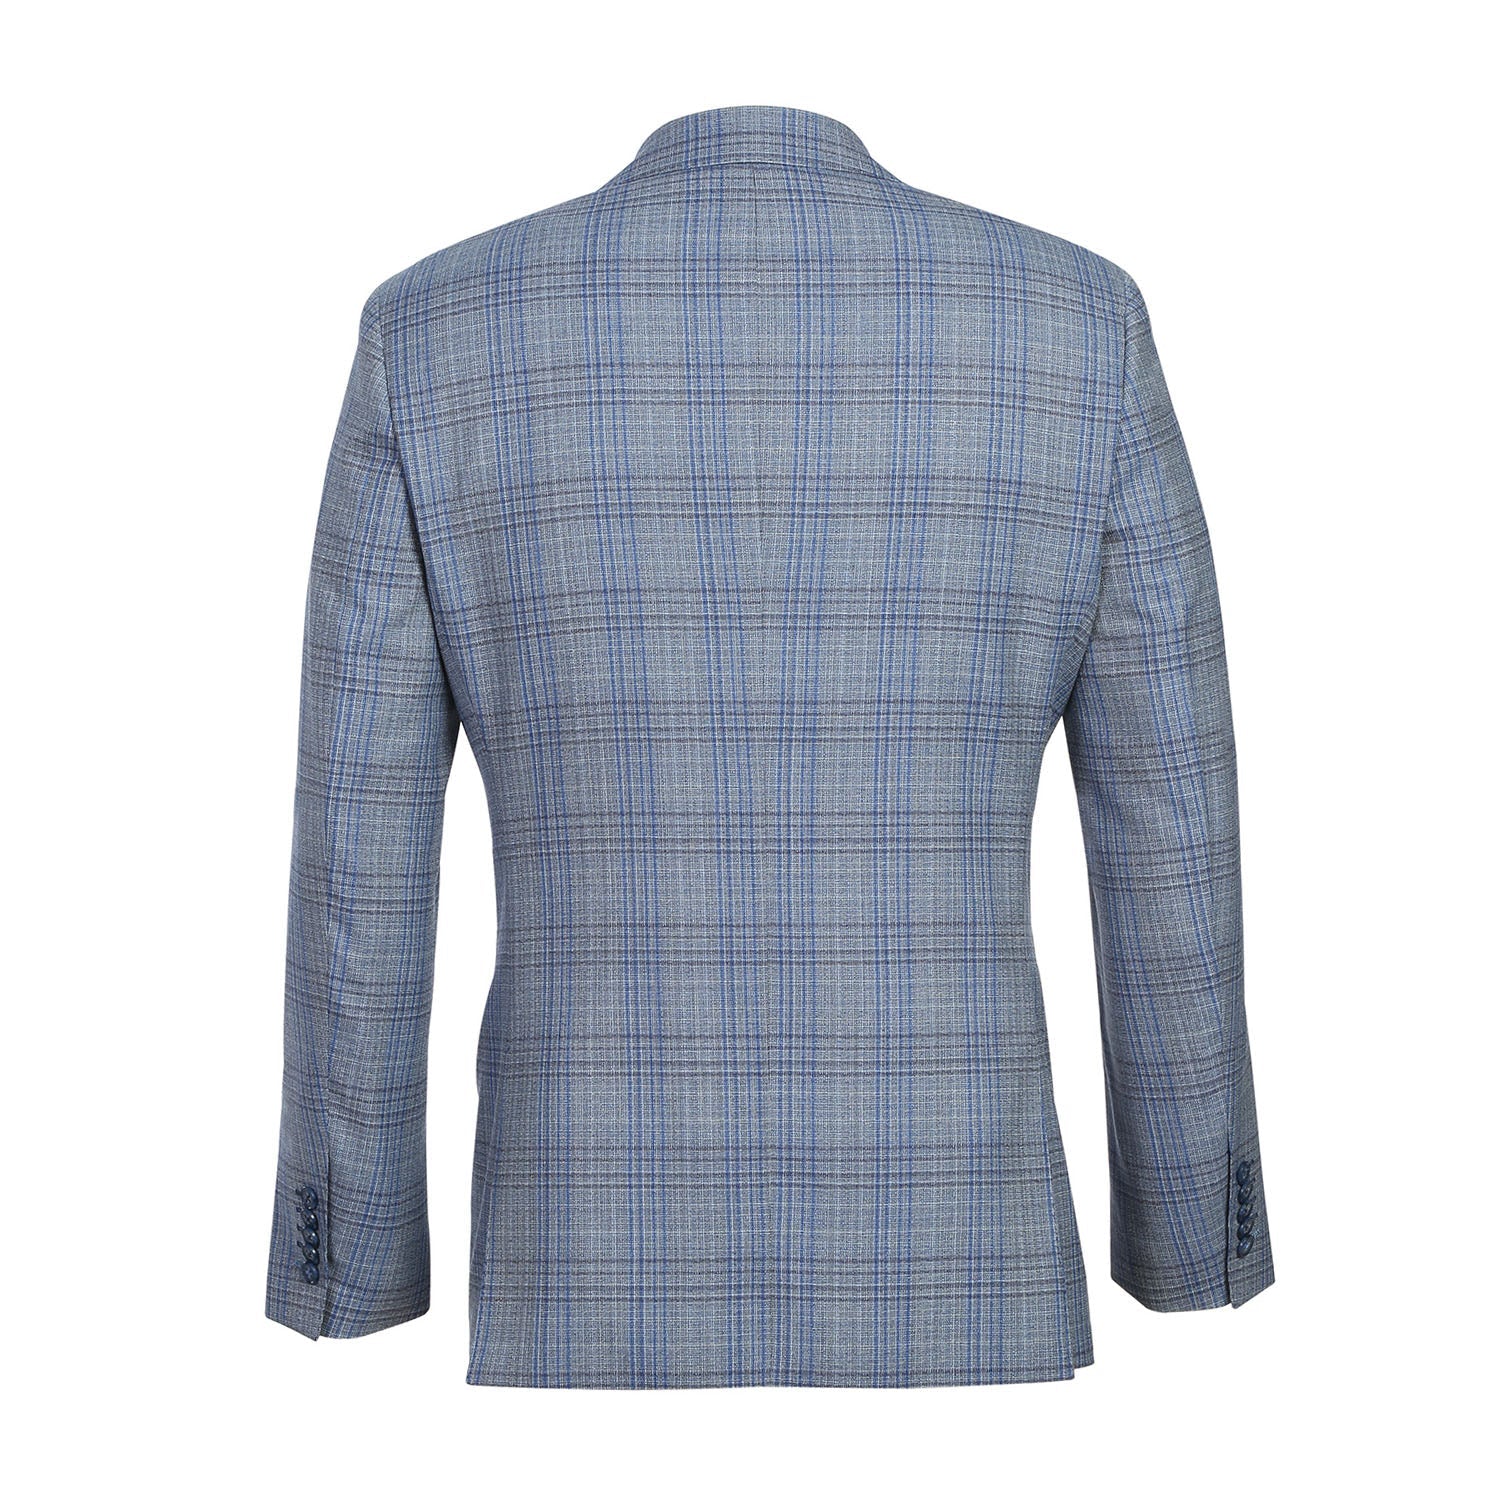 English Laundry Light Gray with Blue Check Wool Suit 3